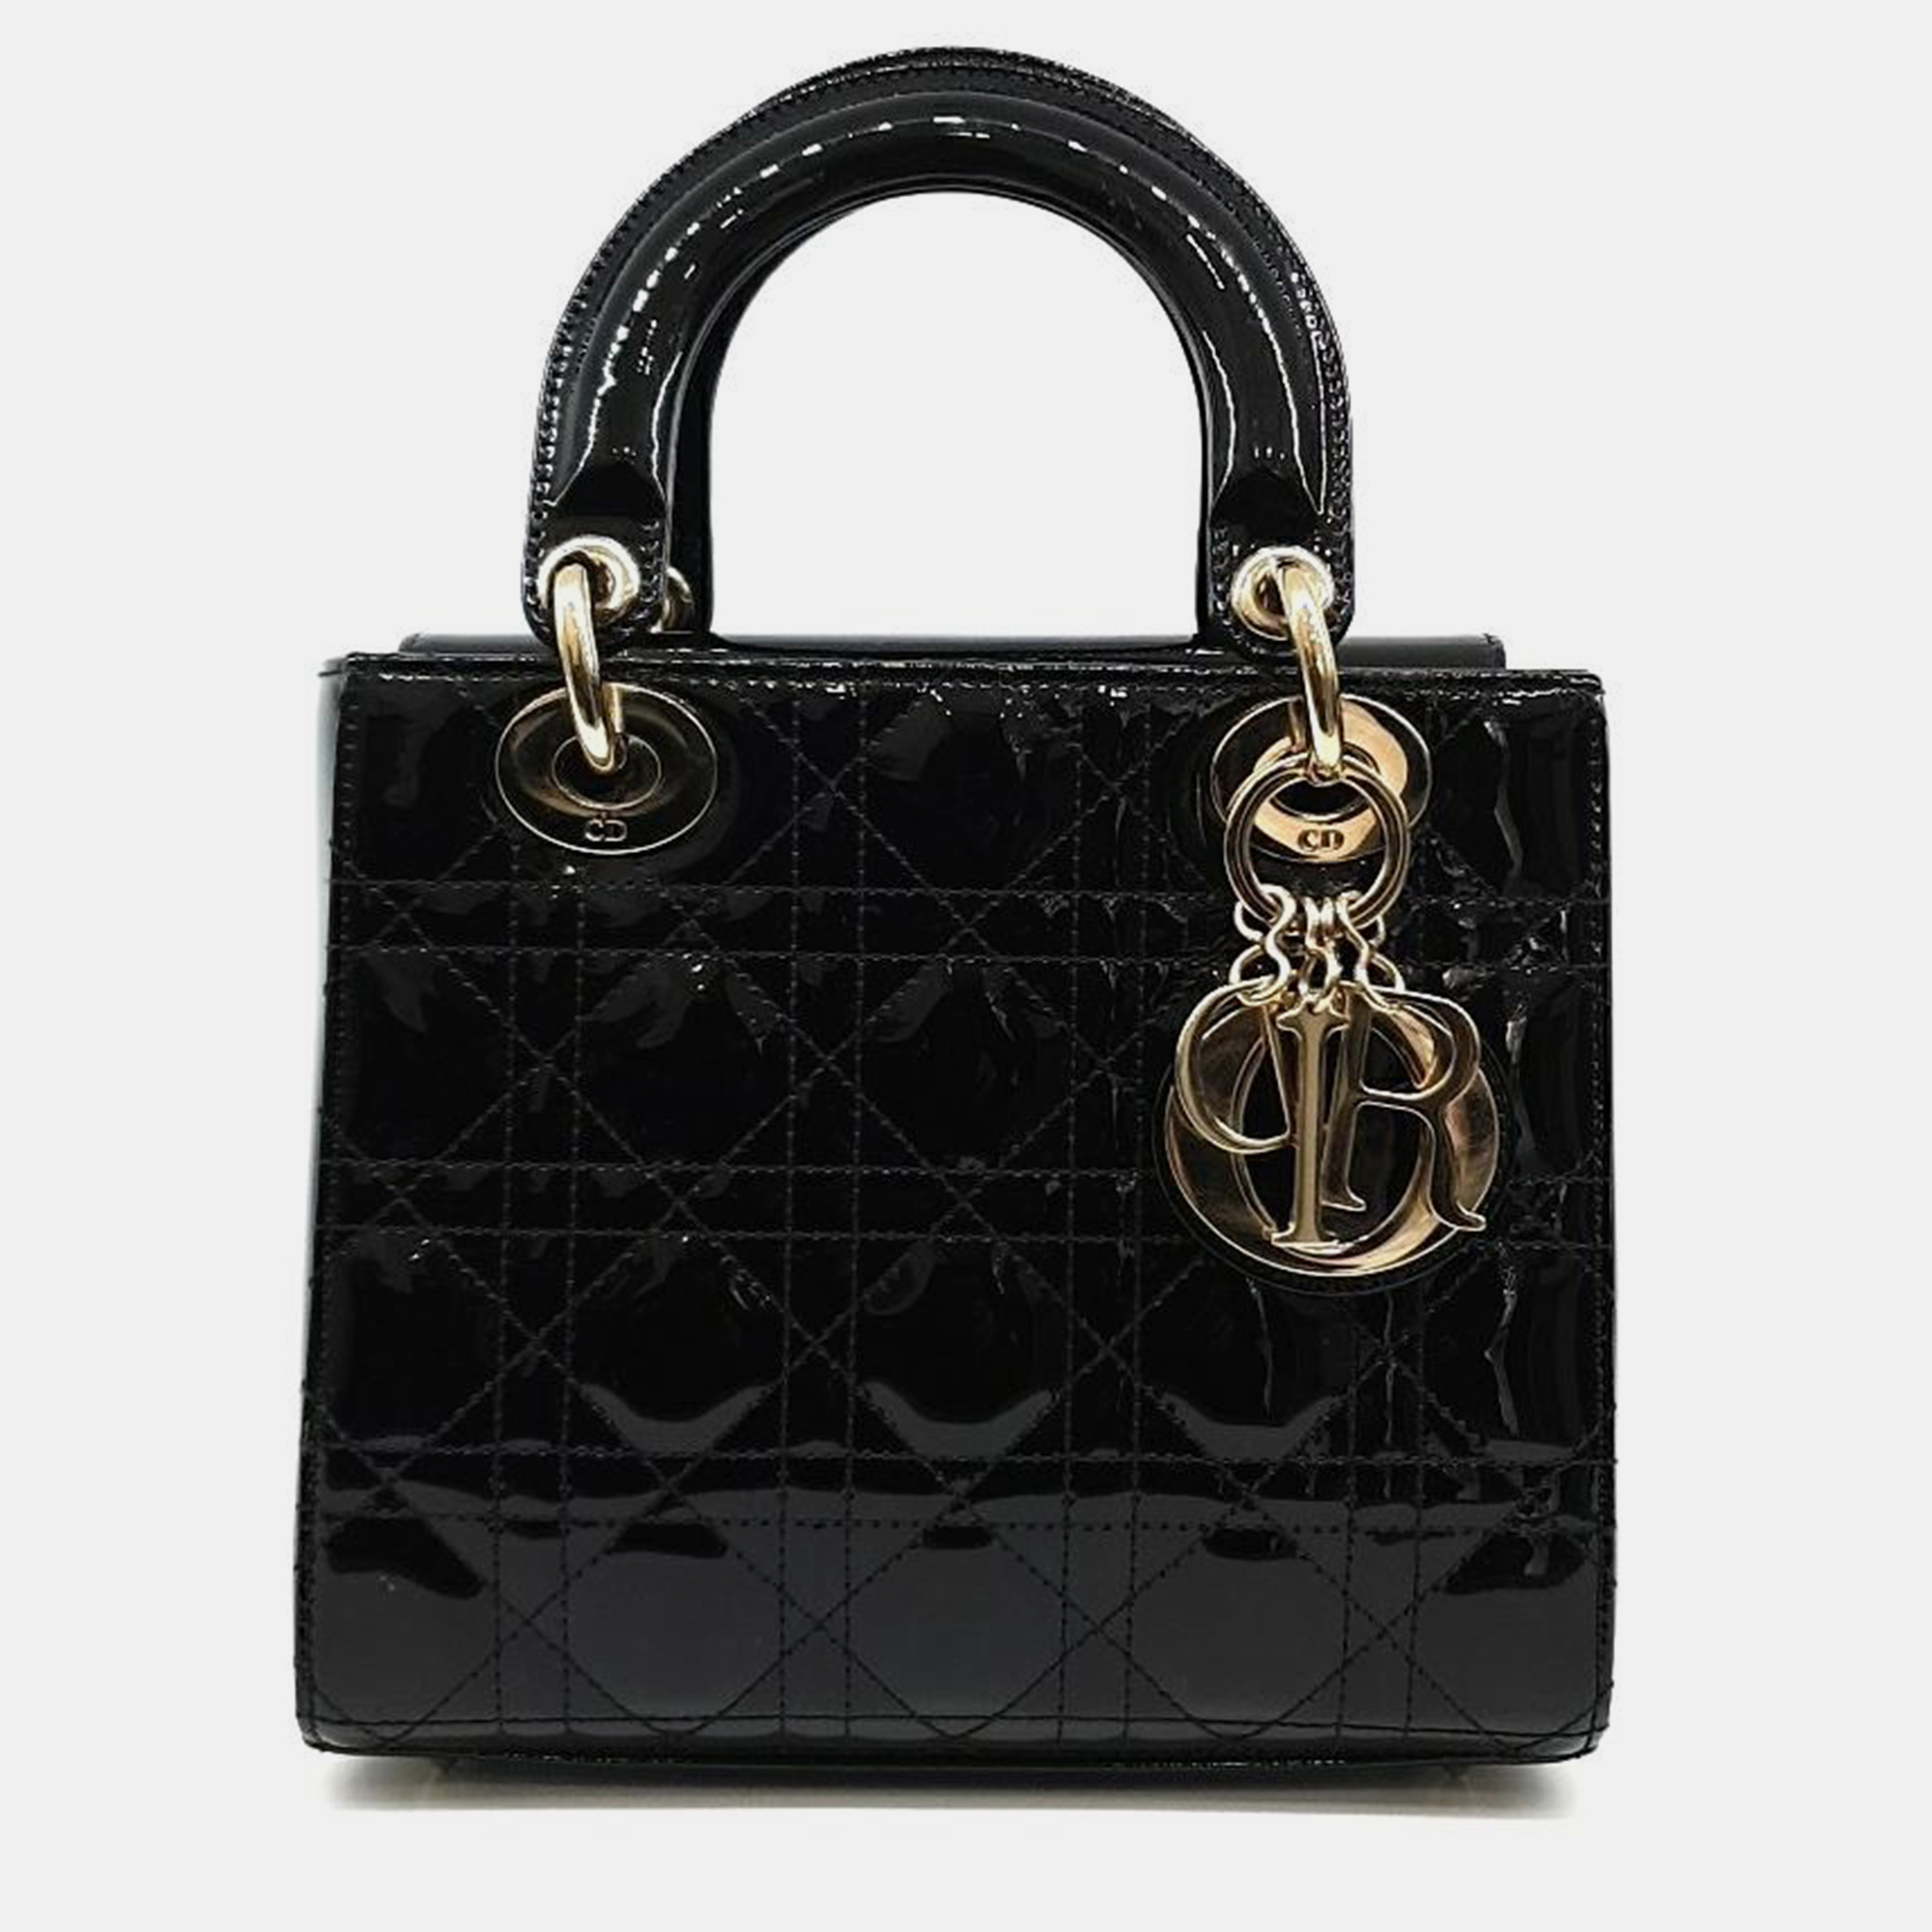 Christian dior patent cannage small lady bag